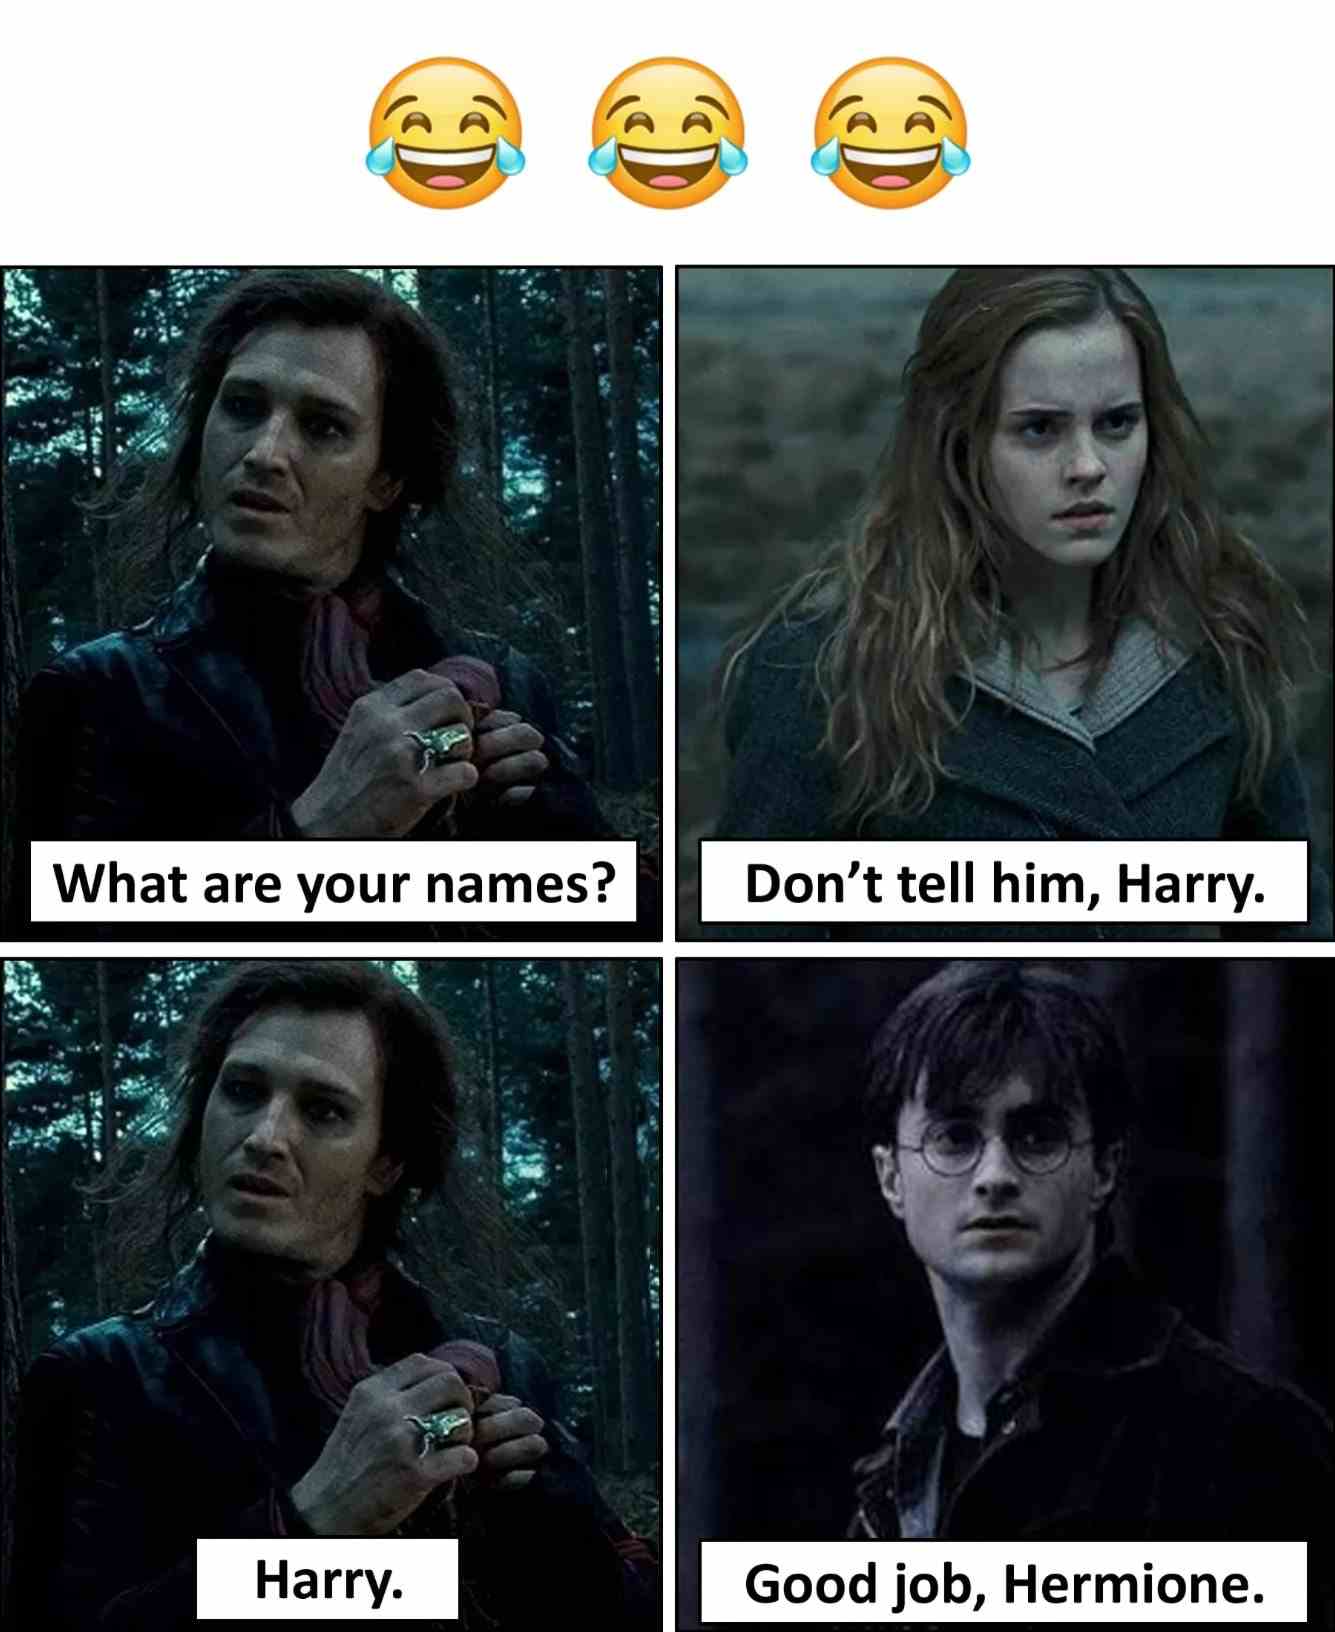 What are your names?